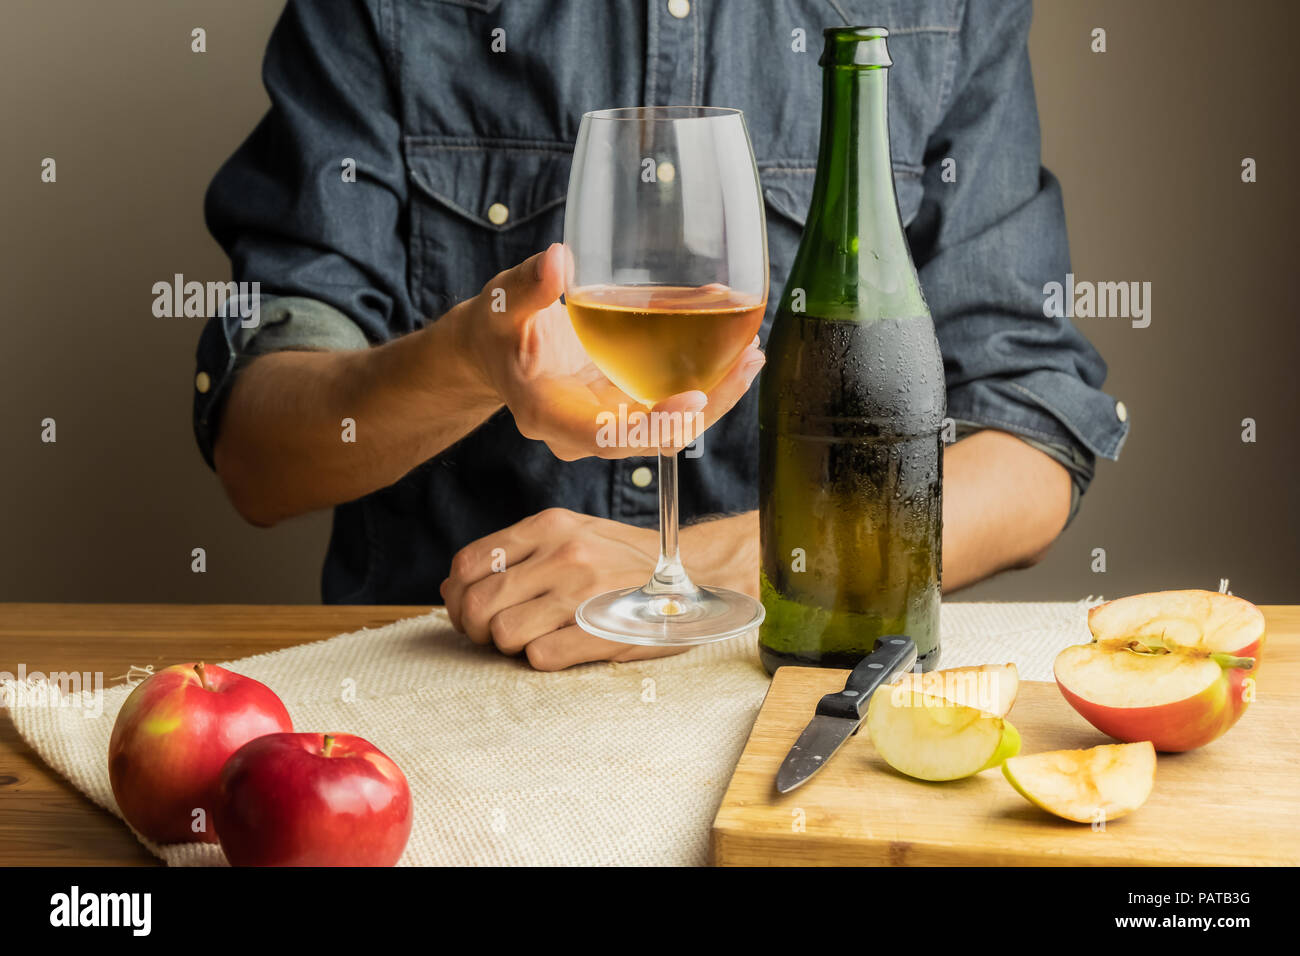 Beautiful ice cold glass and bottle of apple wine, with ripe apples in background. Male hands holding glass of premium cider on rustic wood table. Stock Photo